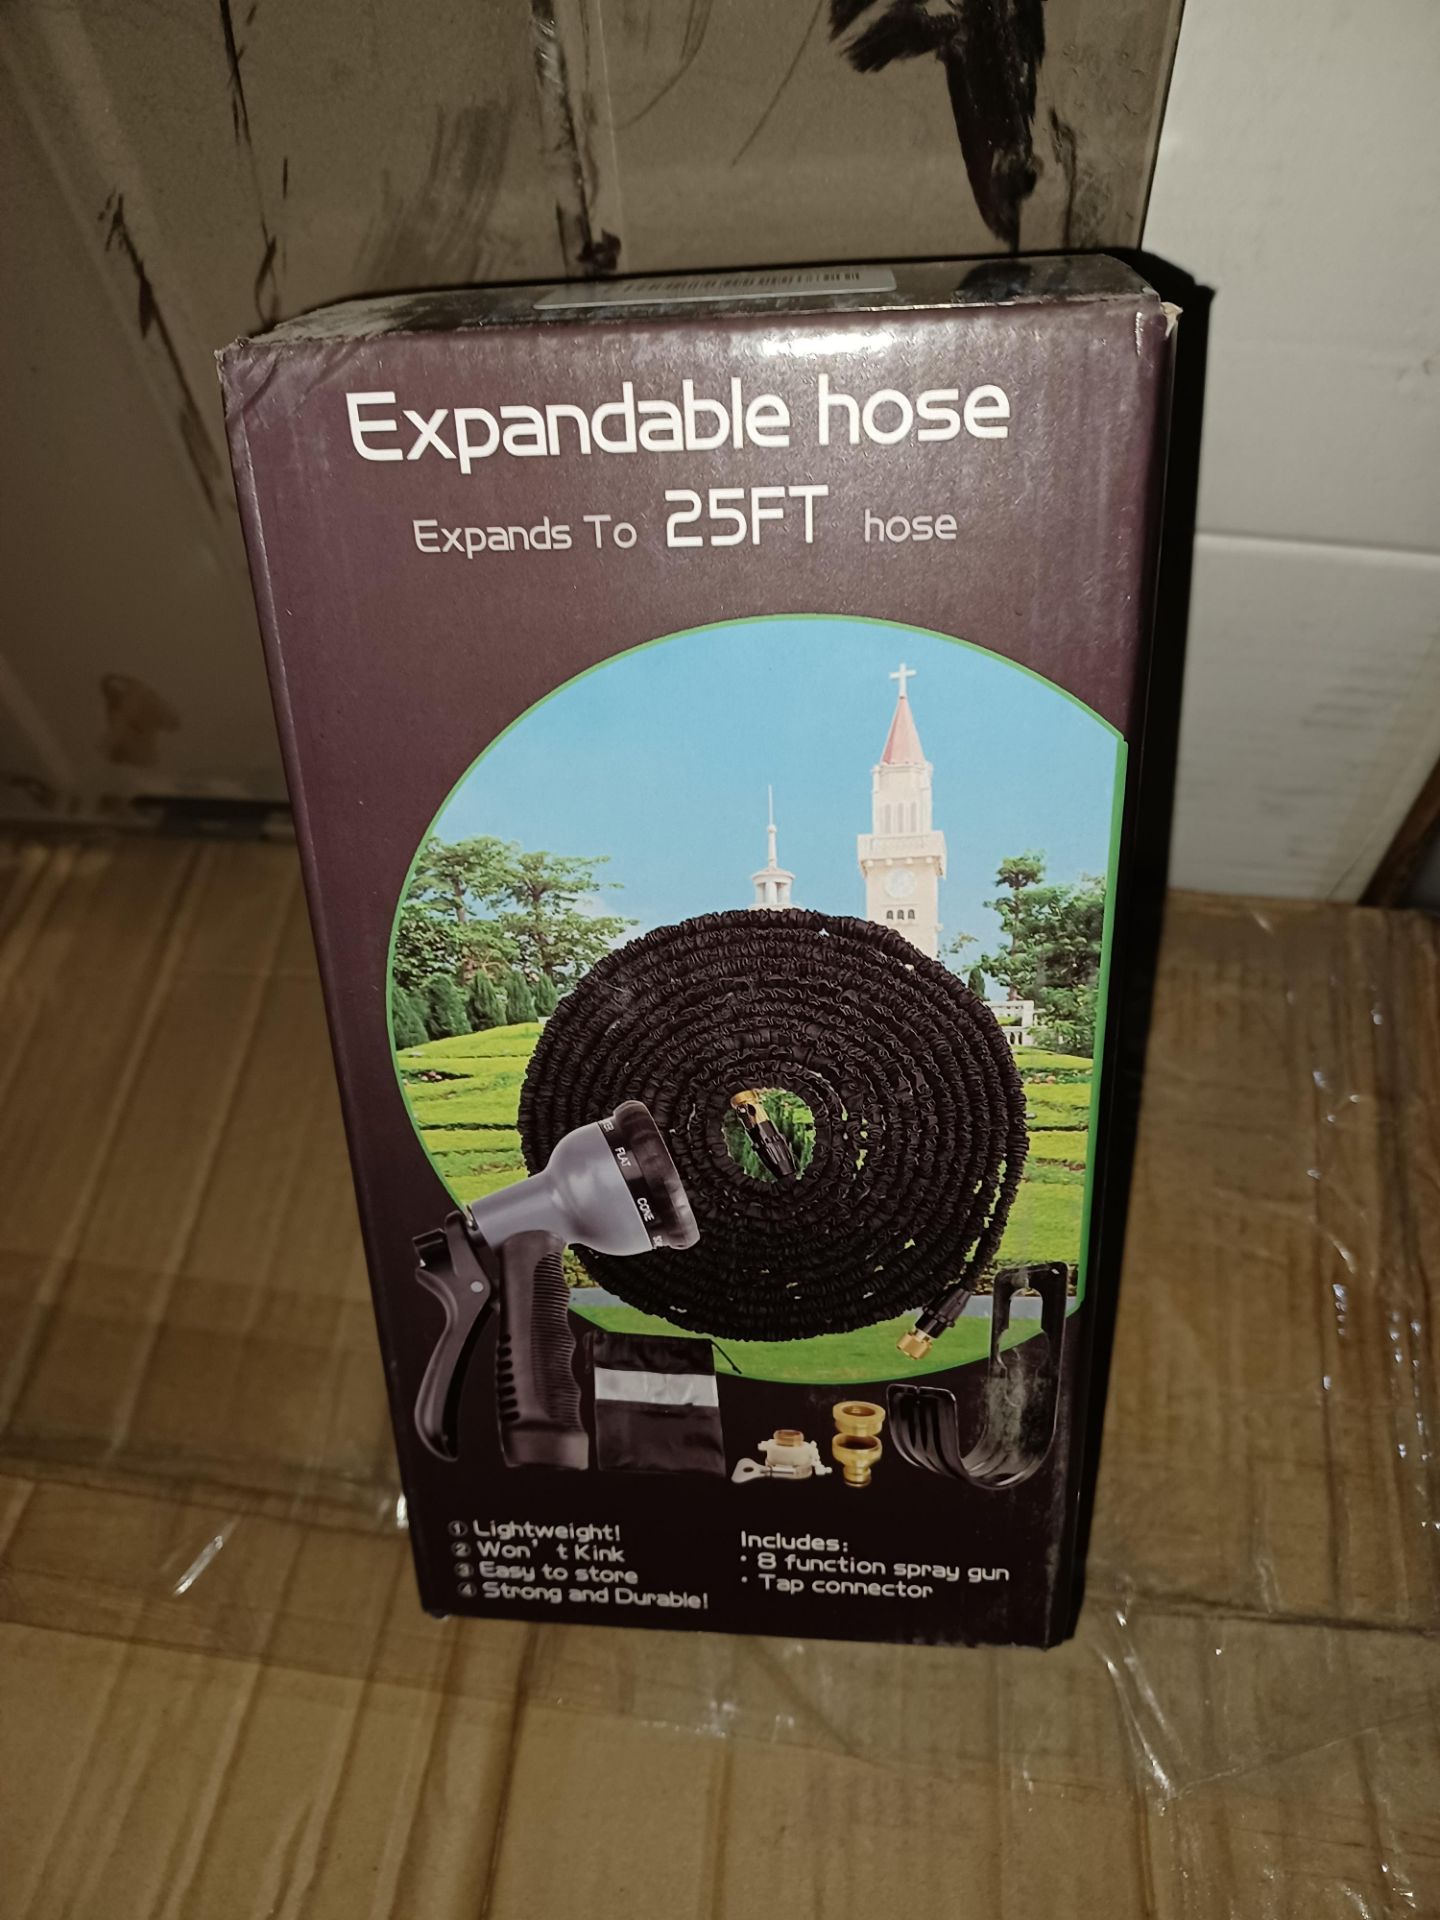 5 X NEW BOXED 25 FOOT EXPANDABLE HOSE SETS. INCLUDES TAP CONNECTOR, 25 FOOT HOSE & 8 FUNCTION